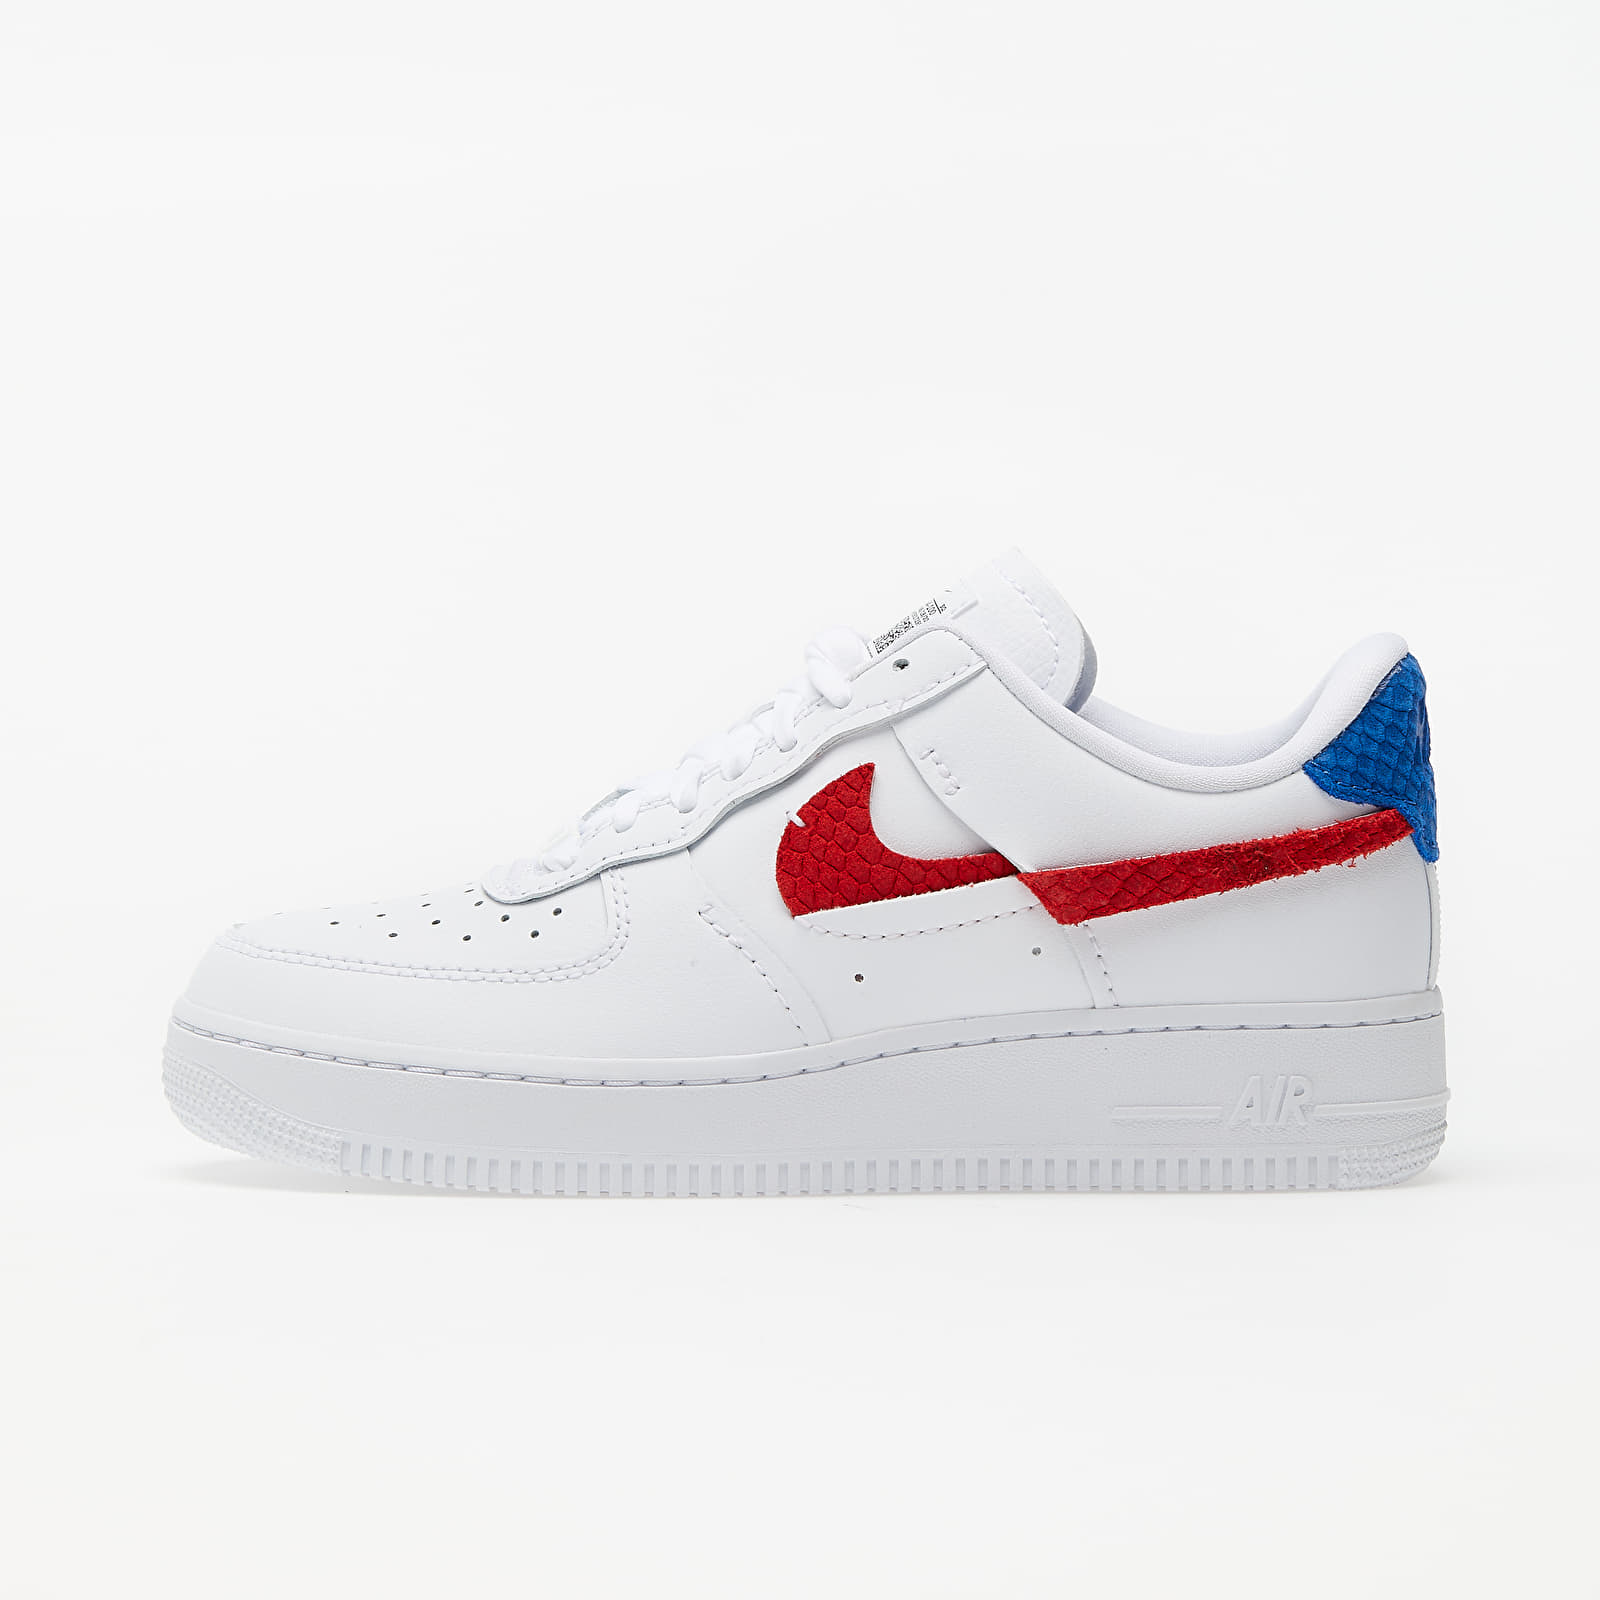 Chaussures et baskets femme Nike Wmns Air Force 1 LXX White/ Game Royal-University Red